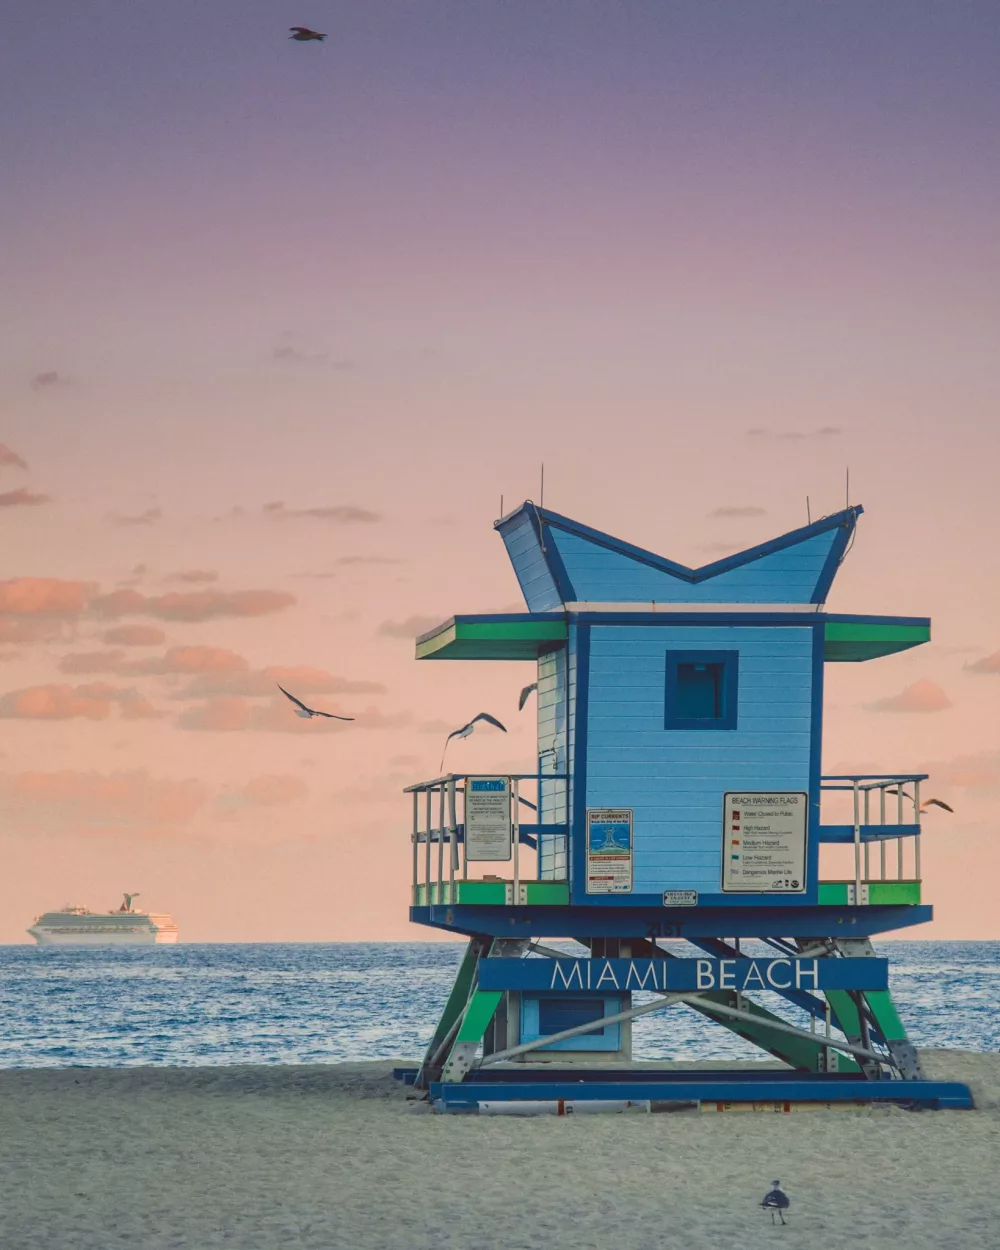 lifeguard stand on Miami beach in sunset